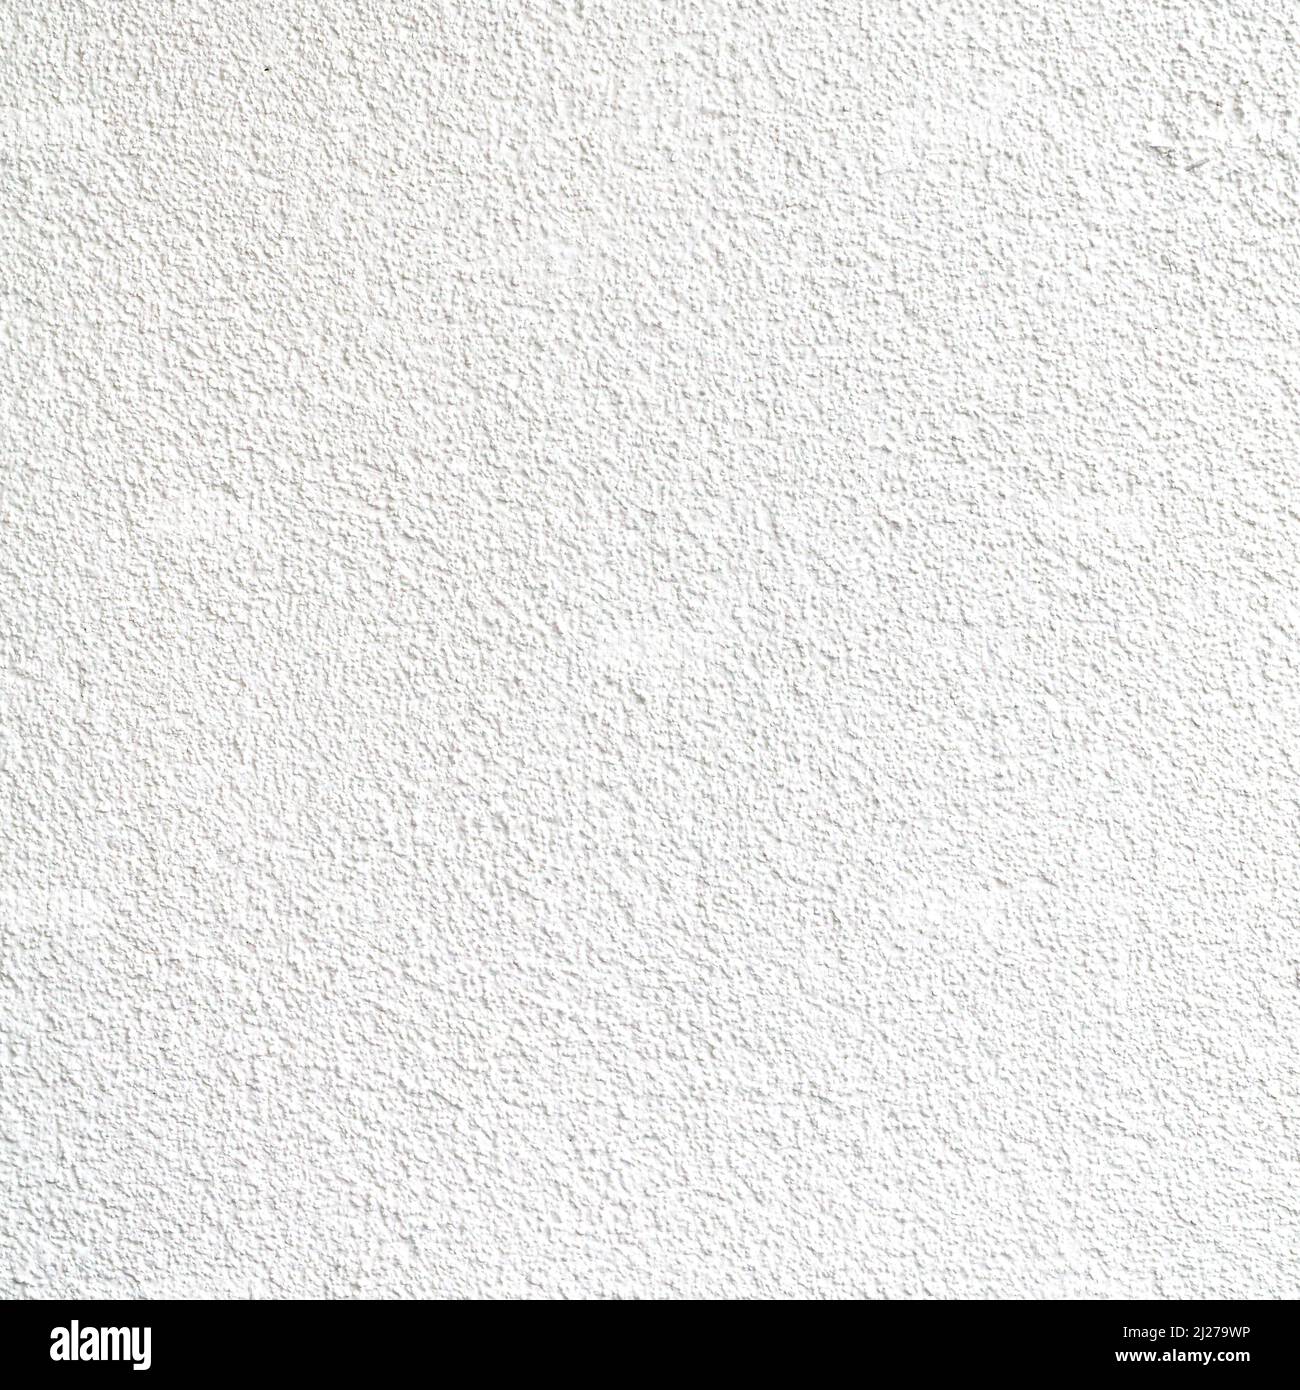 Blank white plastered wall background, rough texture of concrete,  abstract backgrounds. Background for design wallpaper or cards. Stock Photo